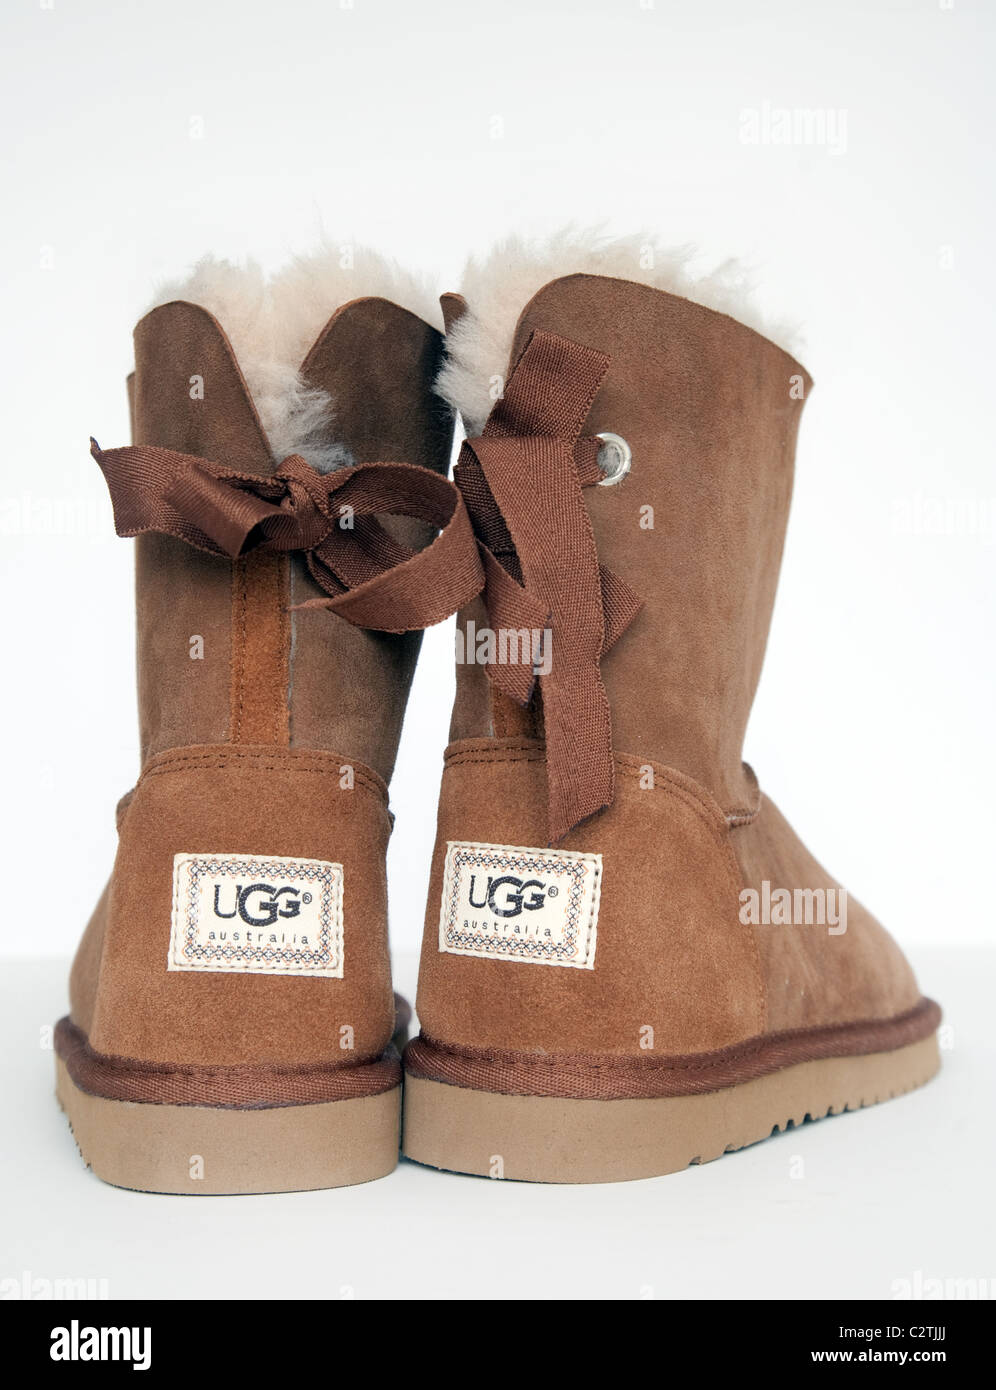 what are ugg boots made of